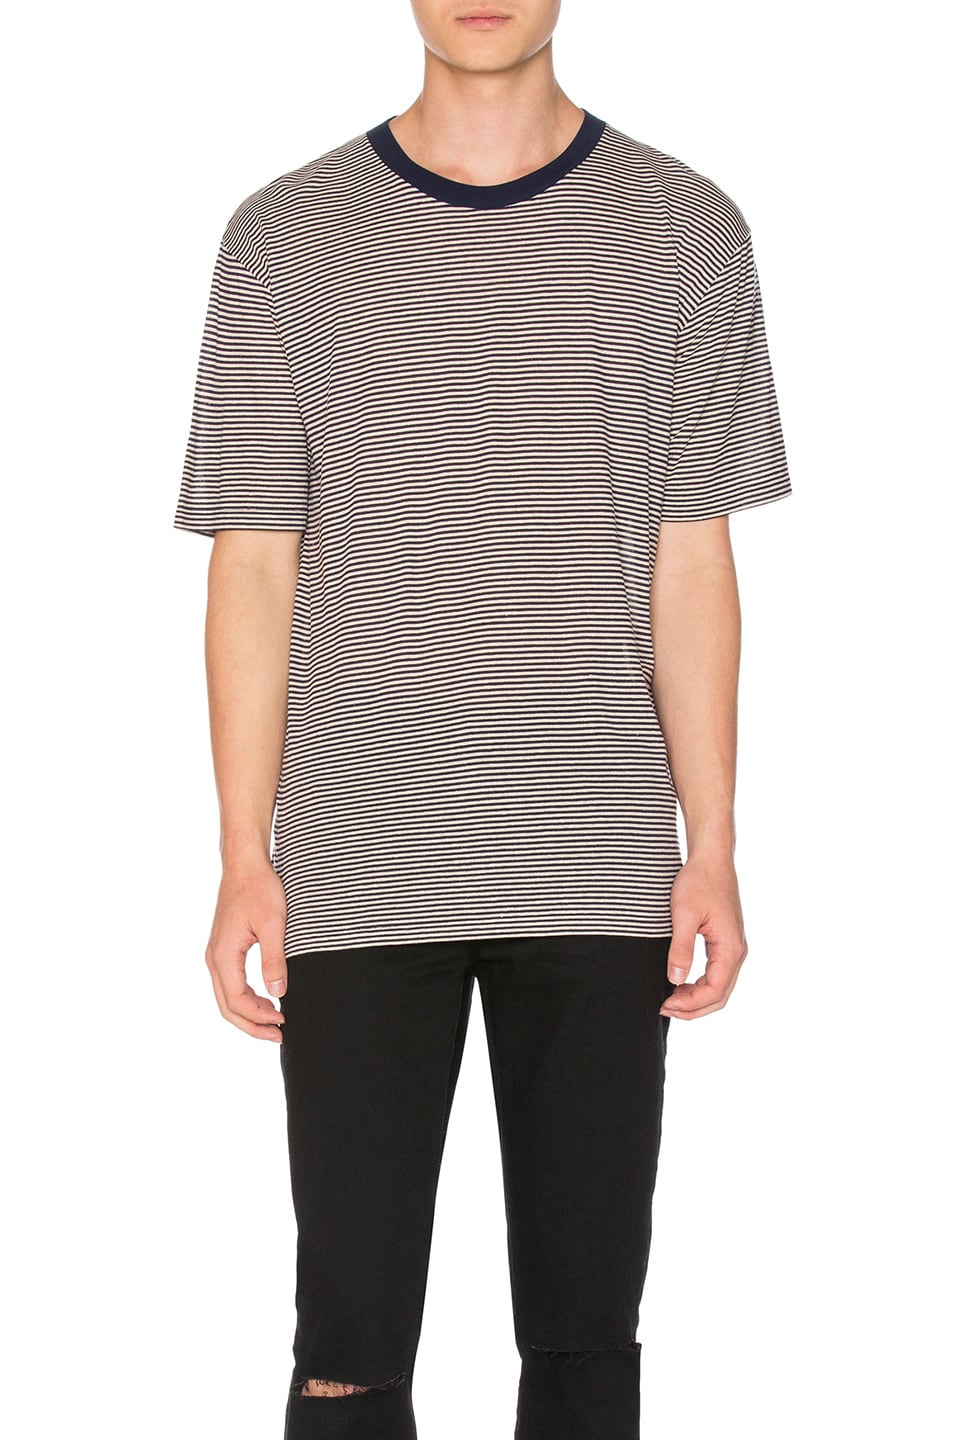 Image 1 of Saint Laurent Striped Tee in Black & White